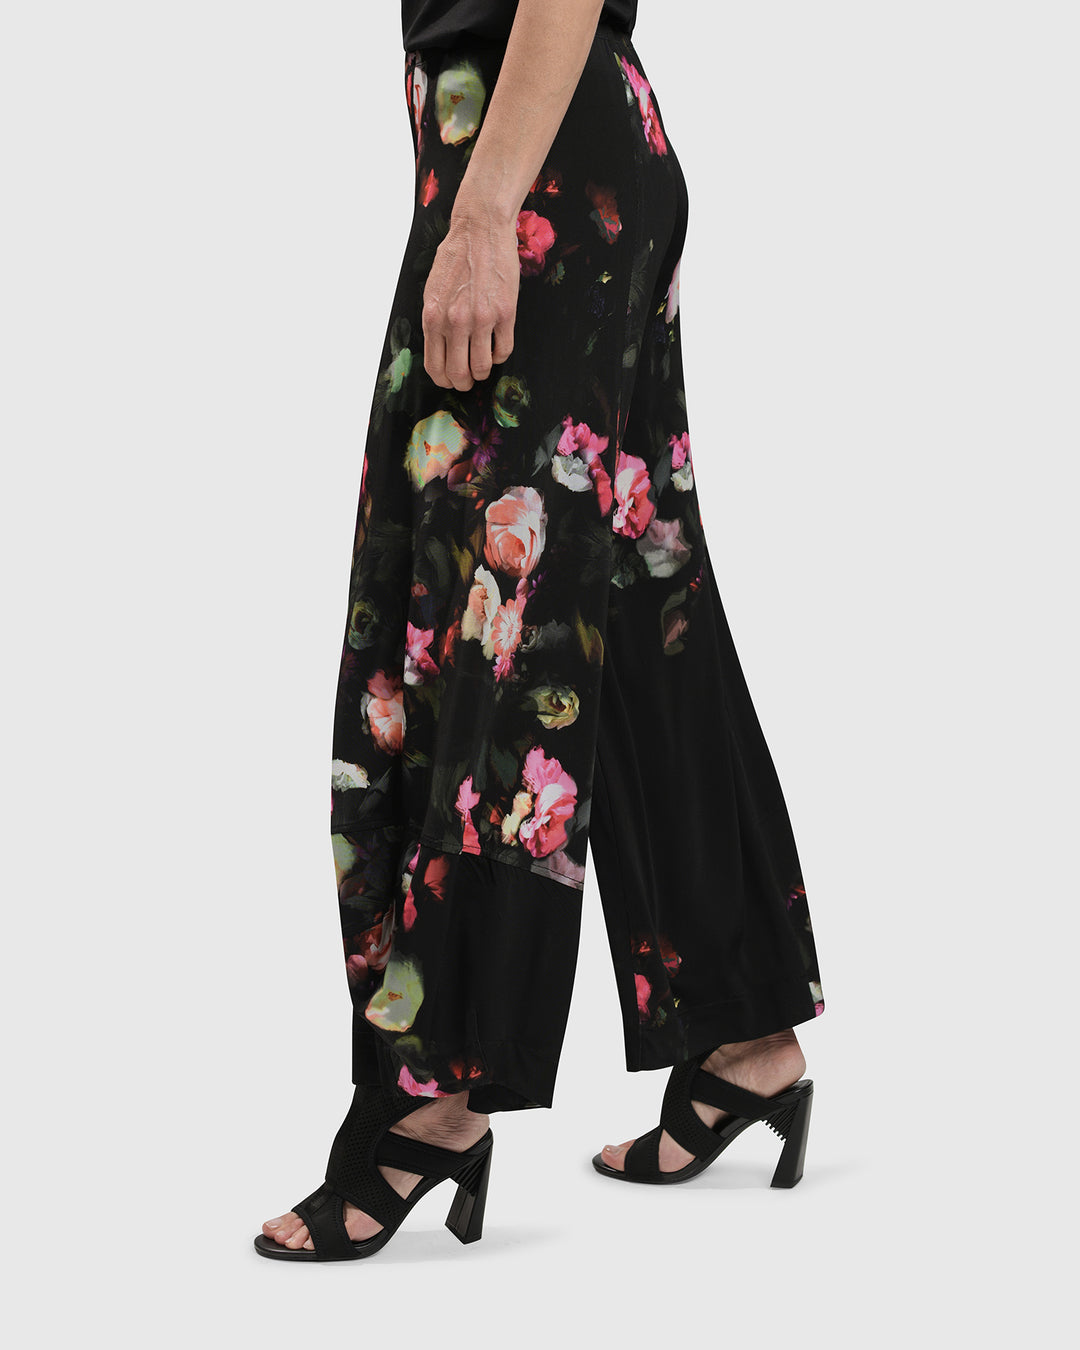 DRINKS-ON-ME PUNTO PANTS, FLORAL